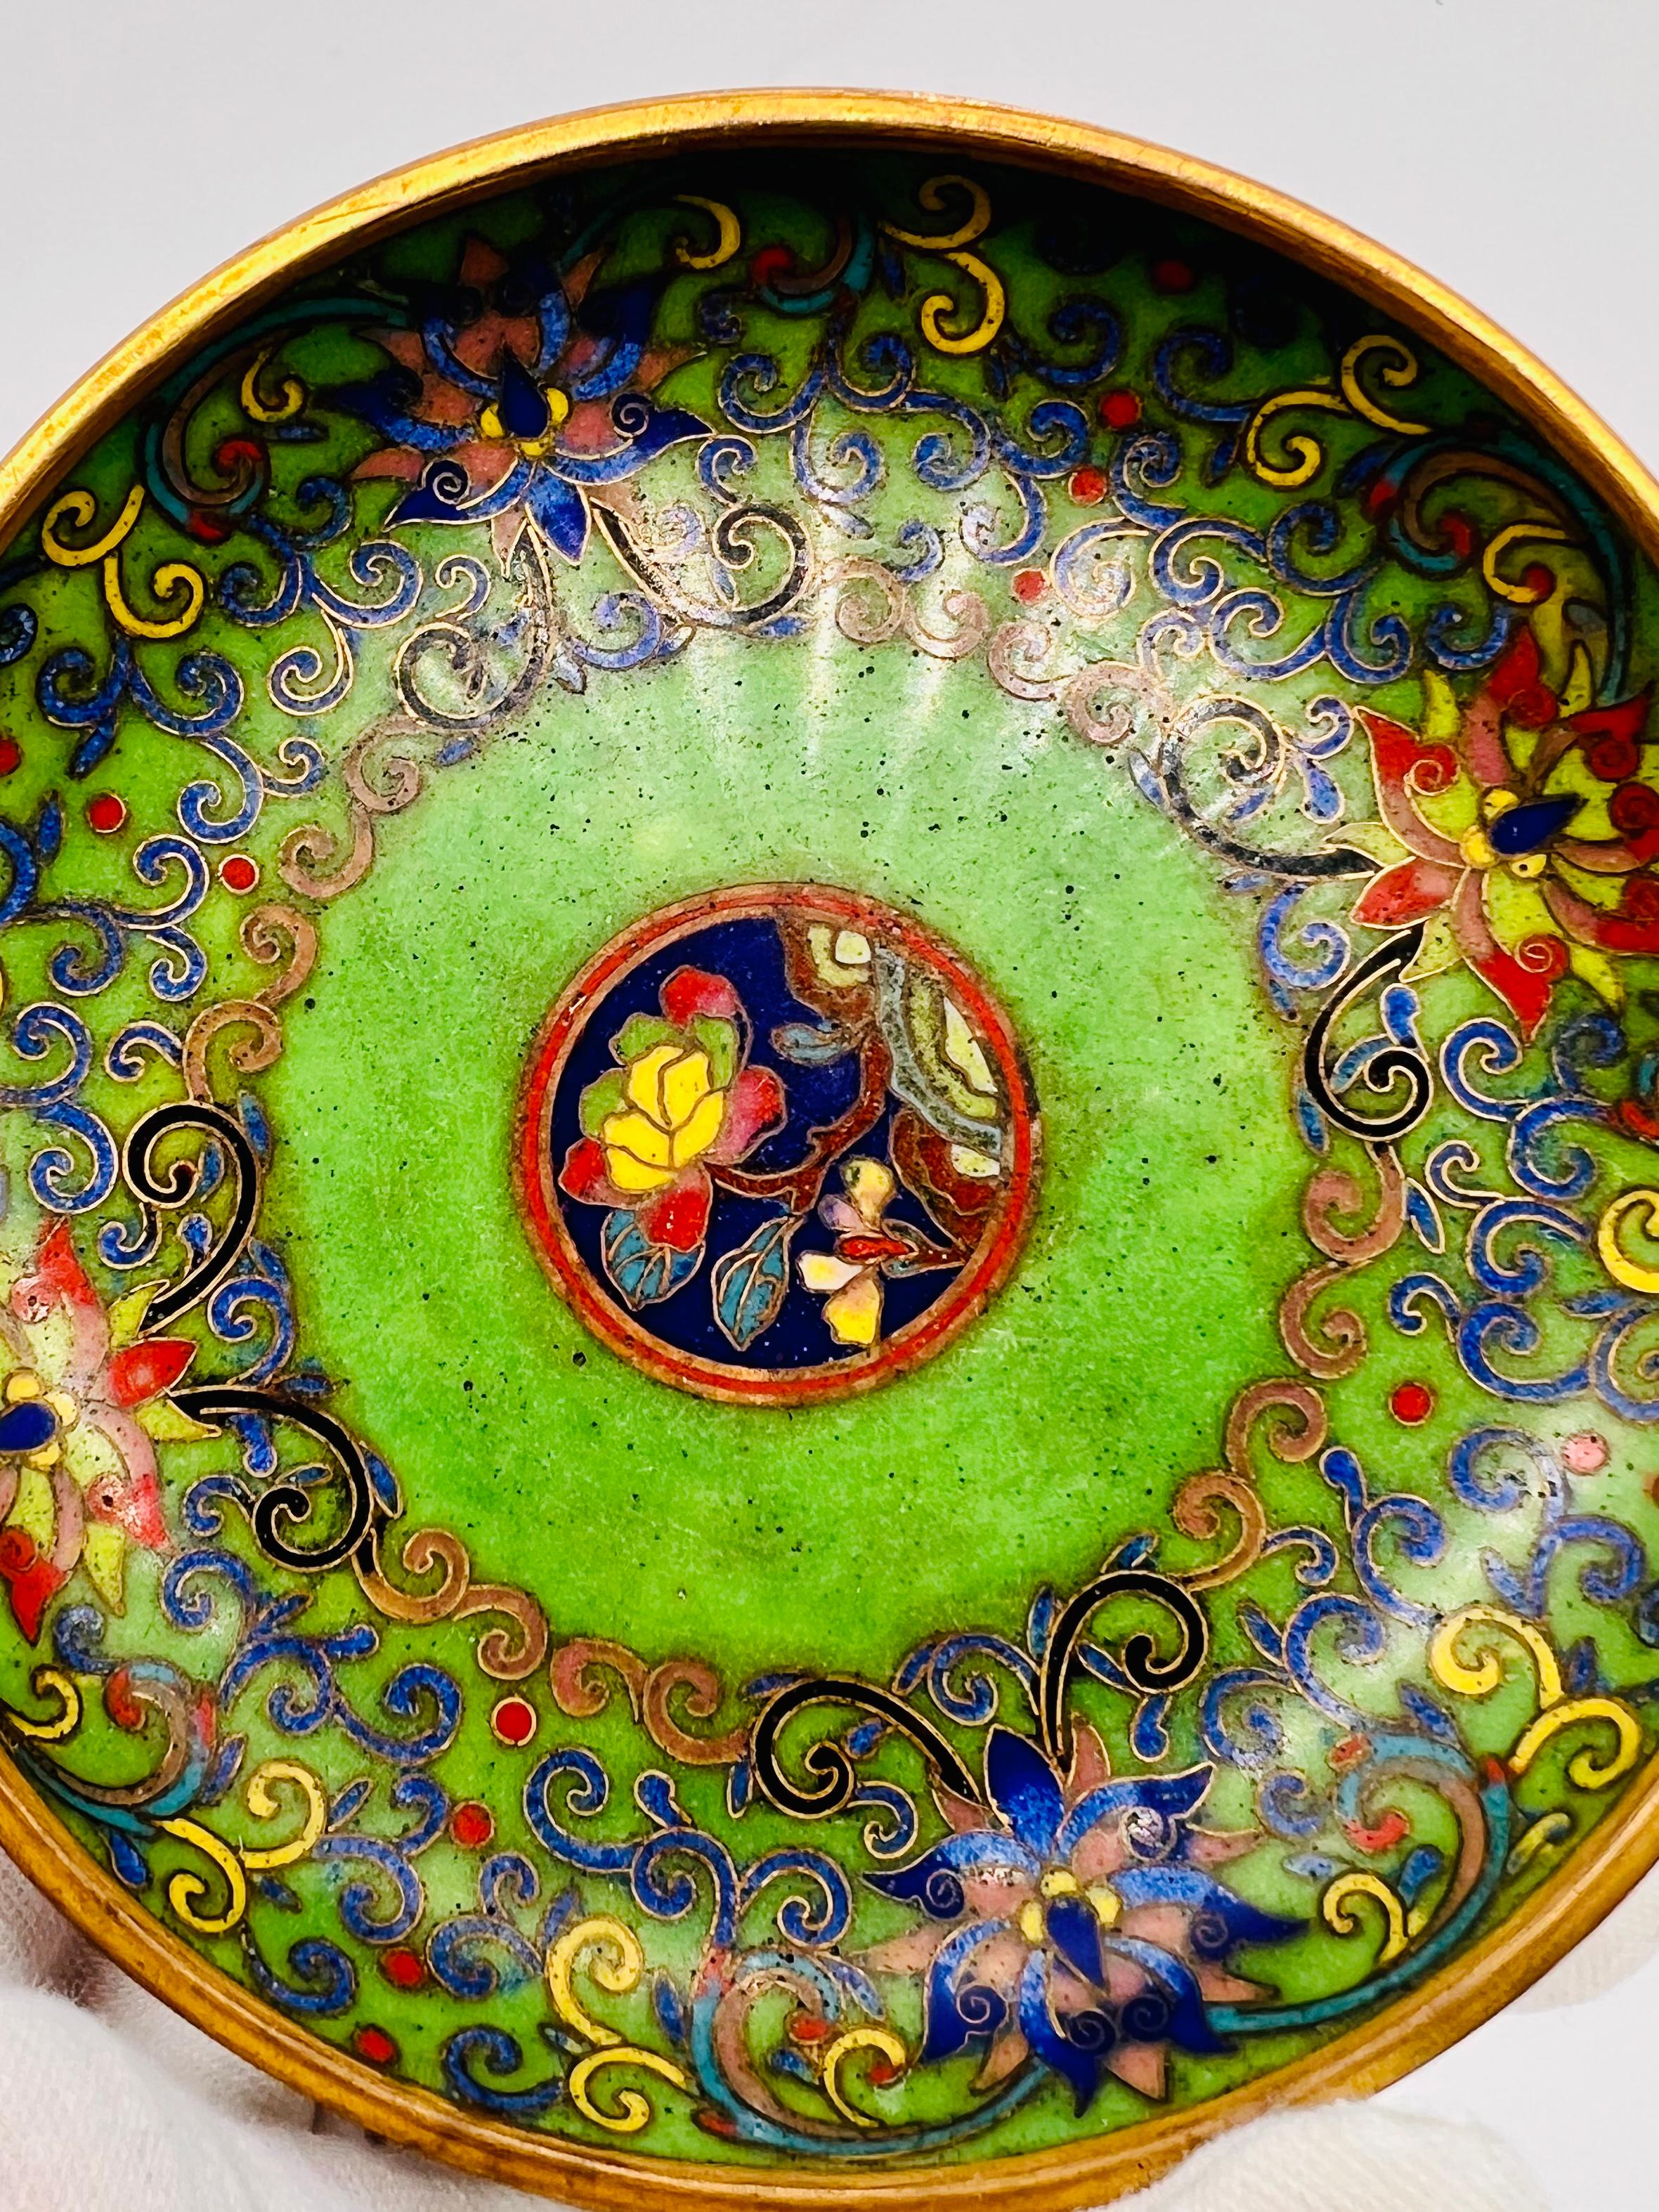 Fine Chinese Cloisonne Enamel Plate / Dish / Tray, 19th Century For Sale 3